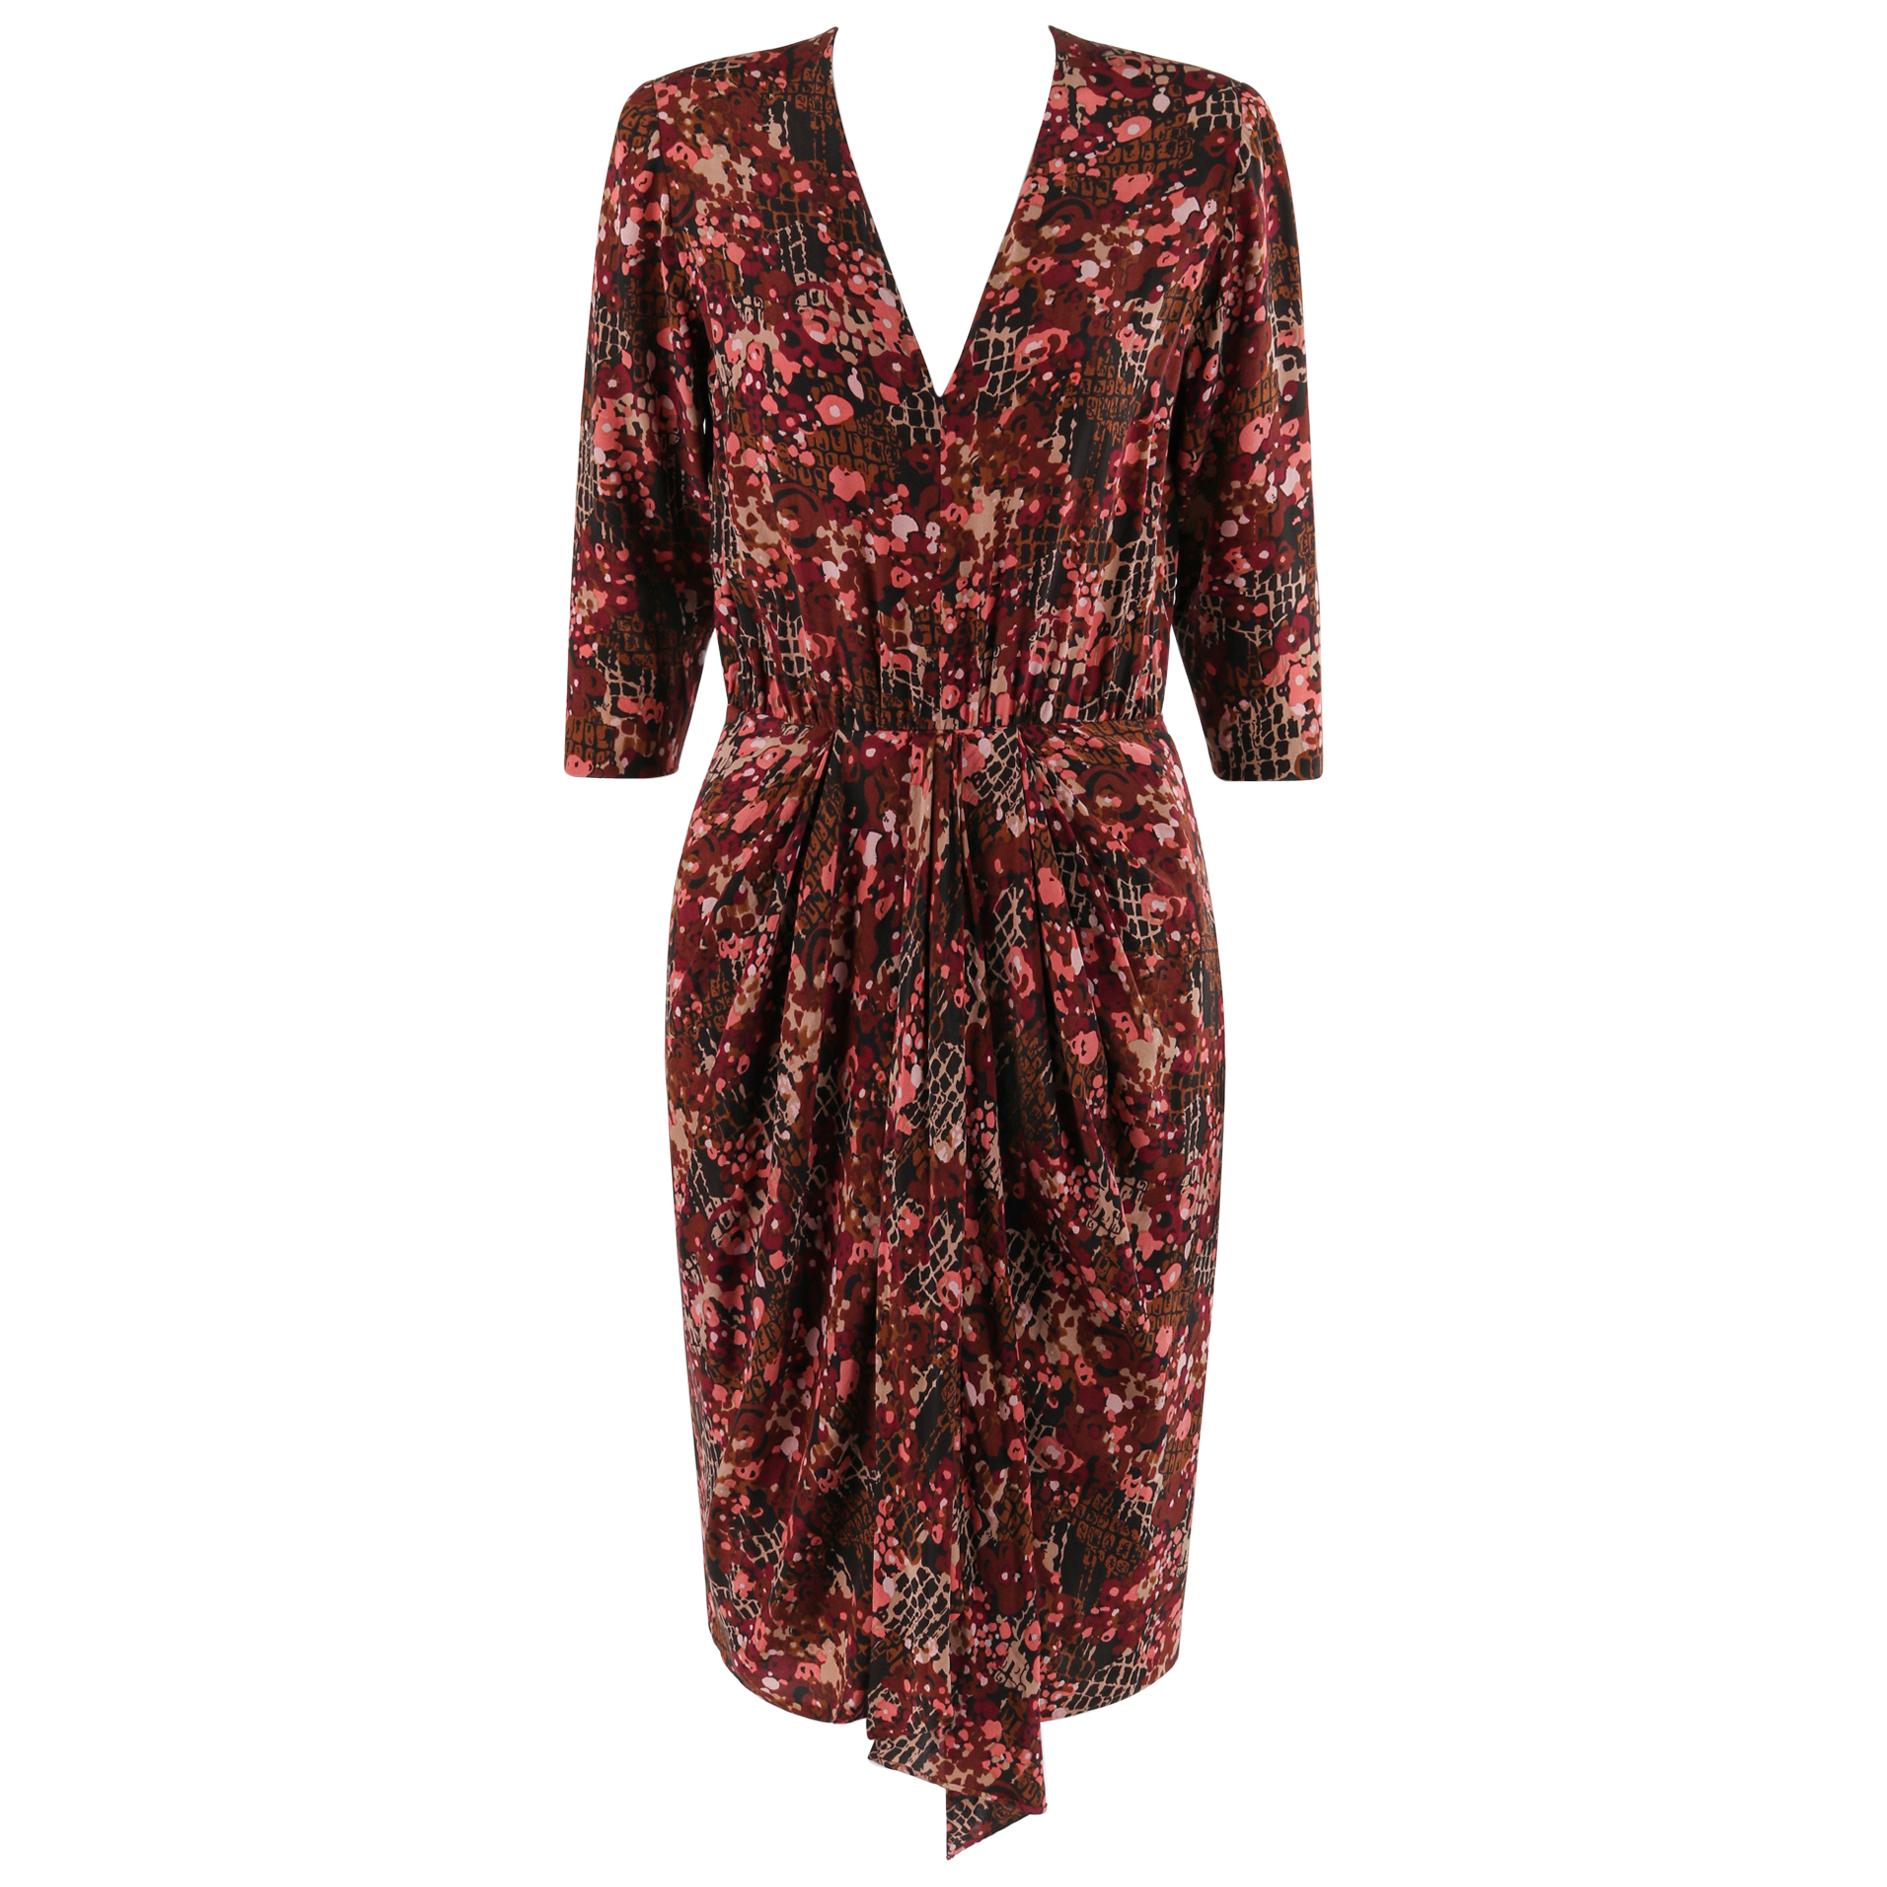 GIVENCHY c.1970’s Haute Couture Silk Floral Print Sheath Dress Numbered